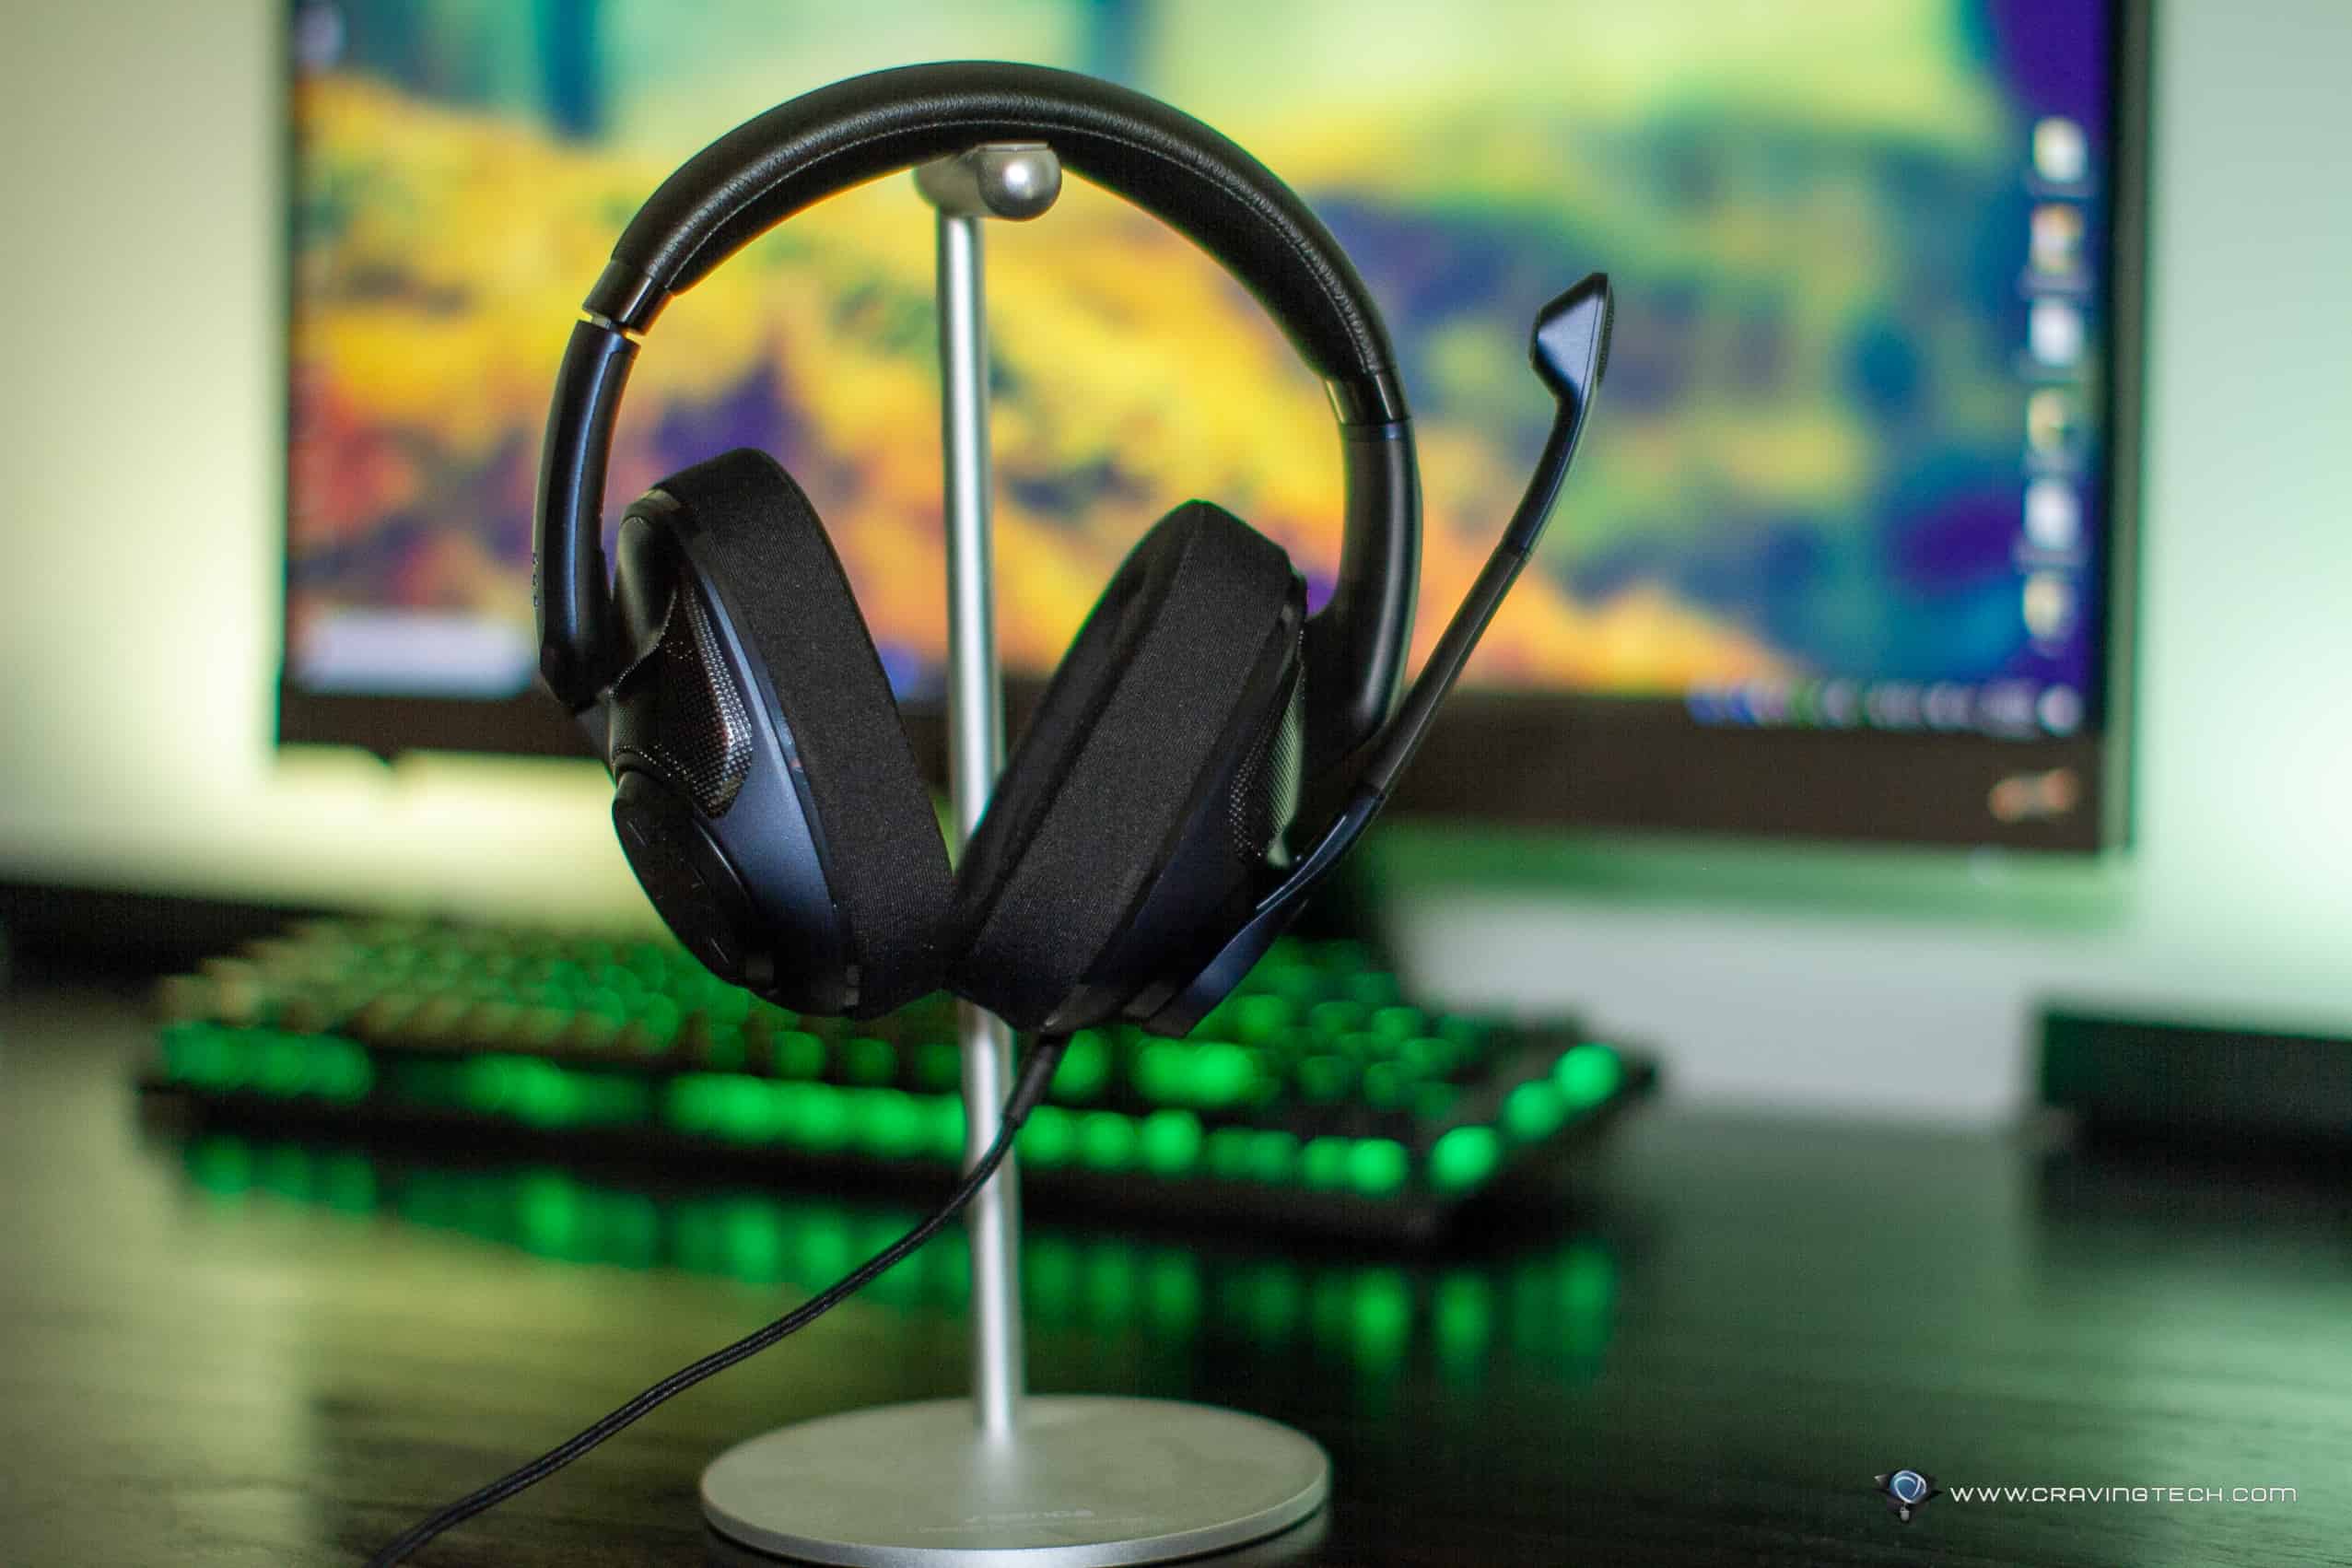 Open or Closed Acoustic Gaming Headset? Your choice